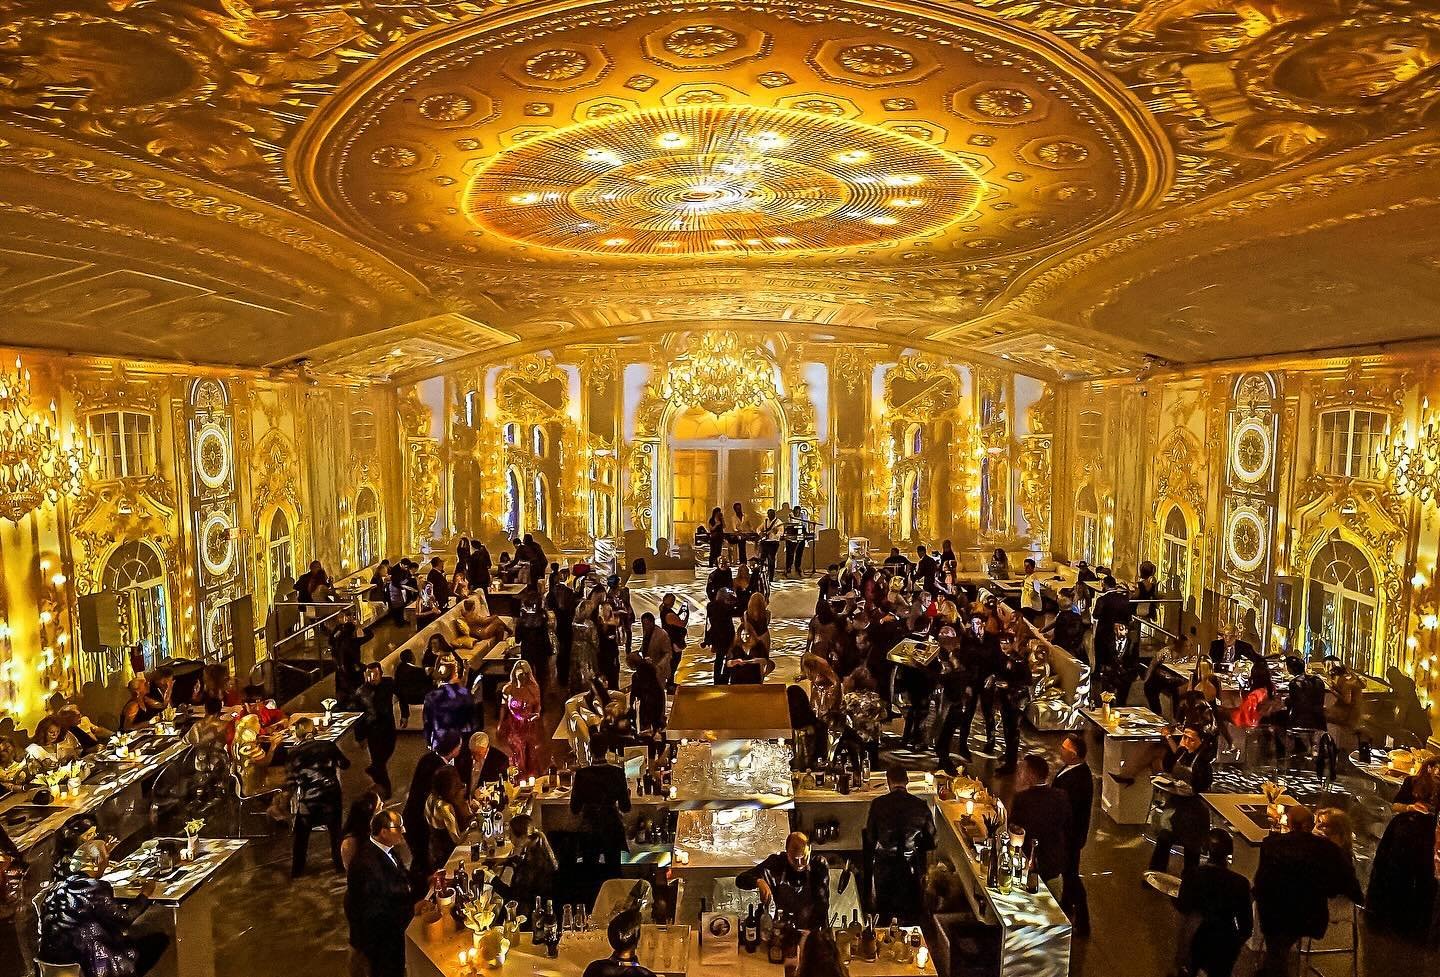 Magnificent Palaces.
-
-
-
-
-
-
-
-
-
-
-
#miamivenue #venues #eventdesign #eventdecor #projectionmapping #immersiveexperience #experiential #immersiveartexperience #visuals